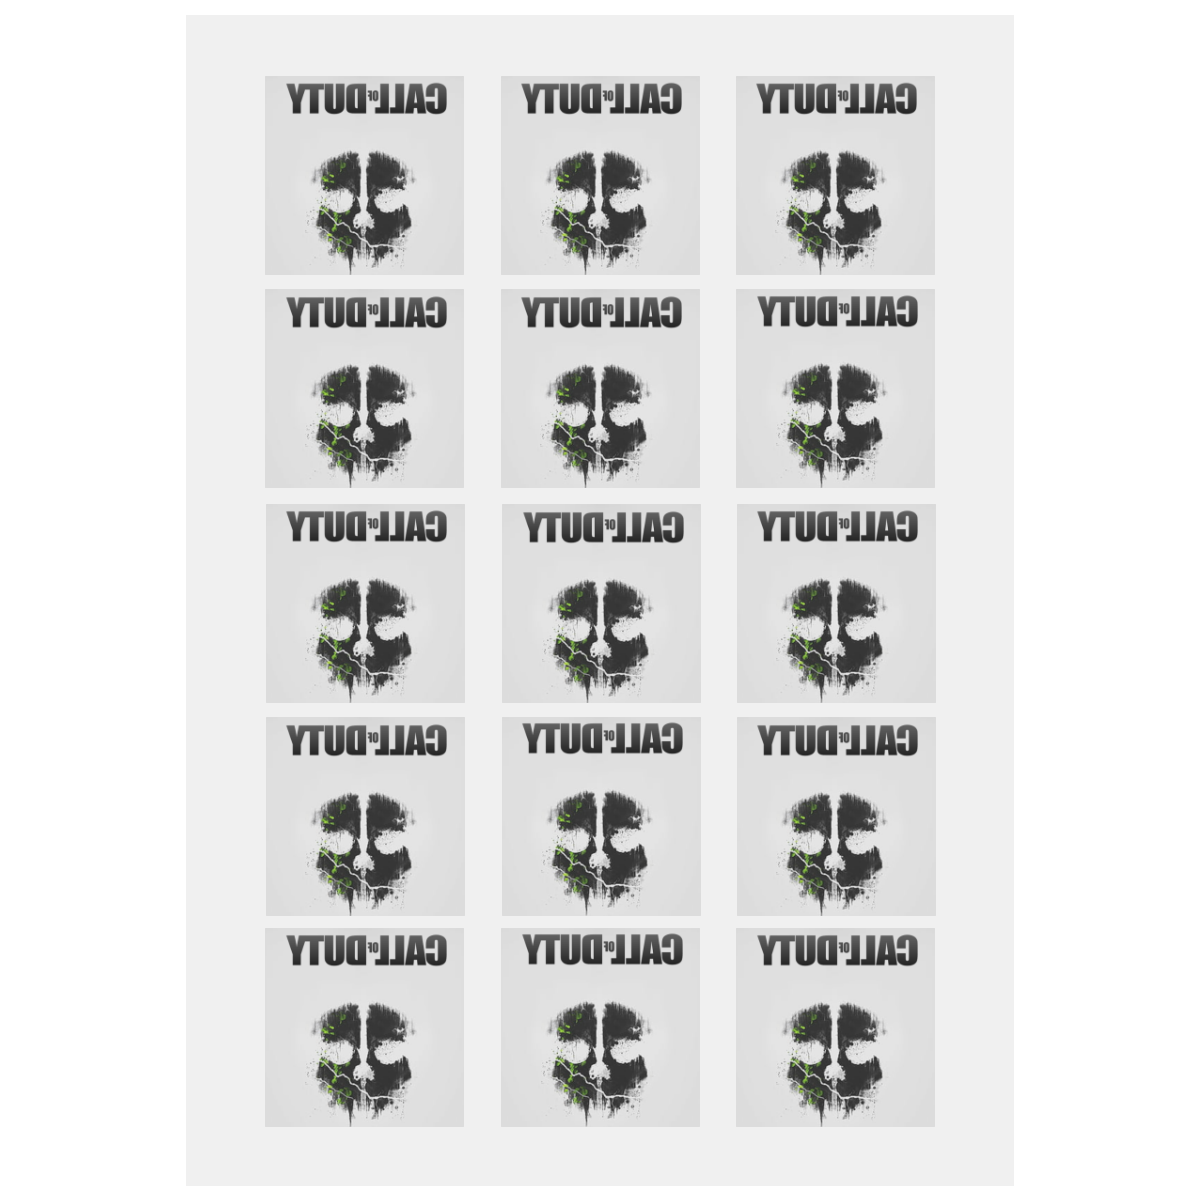 COD Personalized Temporary Tattoo (15 Pieces)